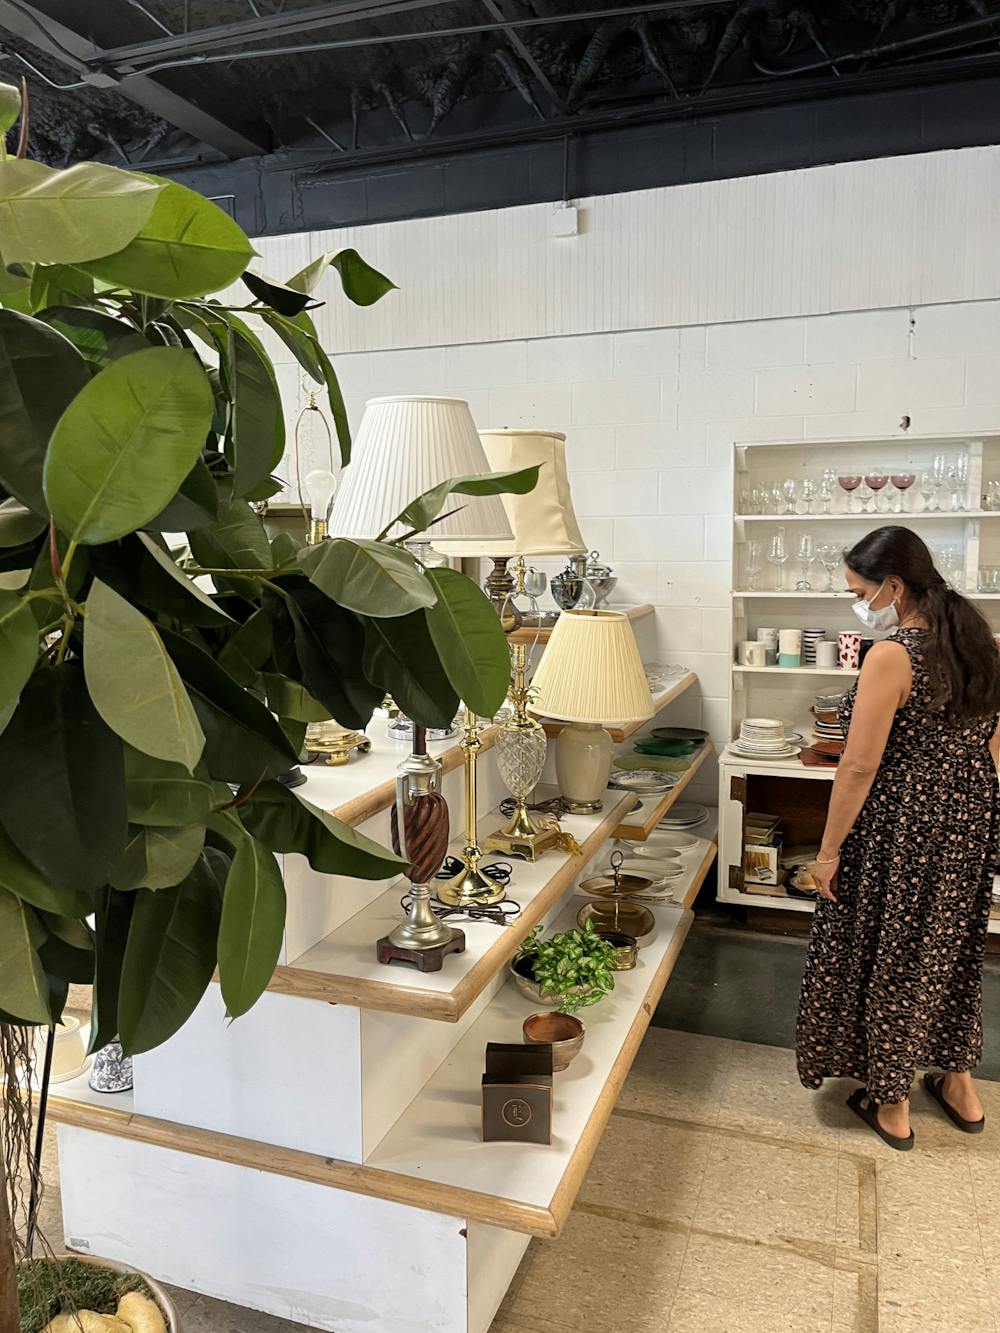 A customer examines a serving platter among the shelves of plates in the ReStore on Oct. 12. The store relocated on Sept. 28 to 2301 NW Sixth St. with a soft opening. It plans to hold a ribbon-cutting Nov. 5